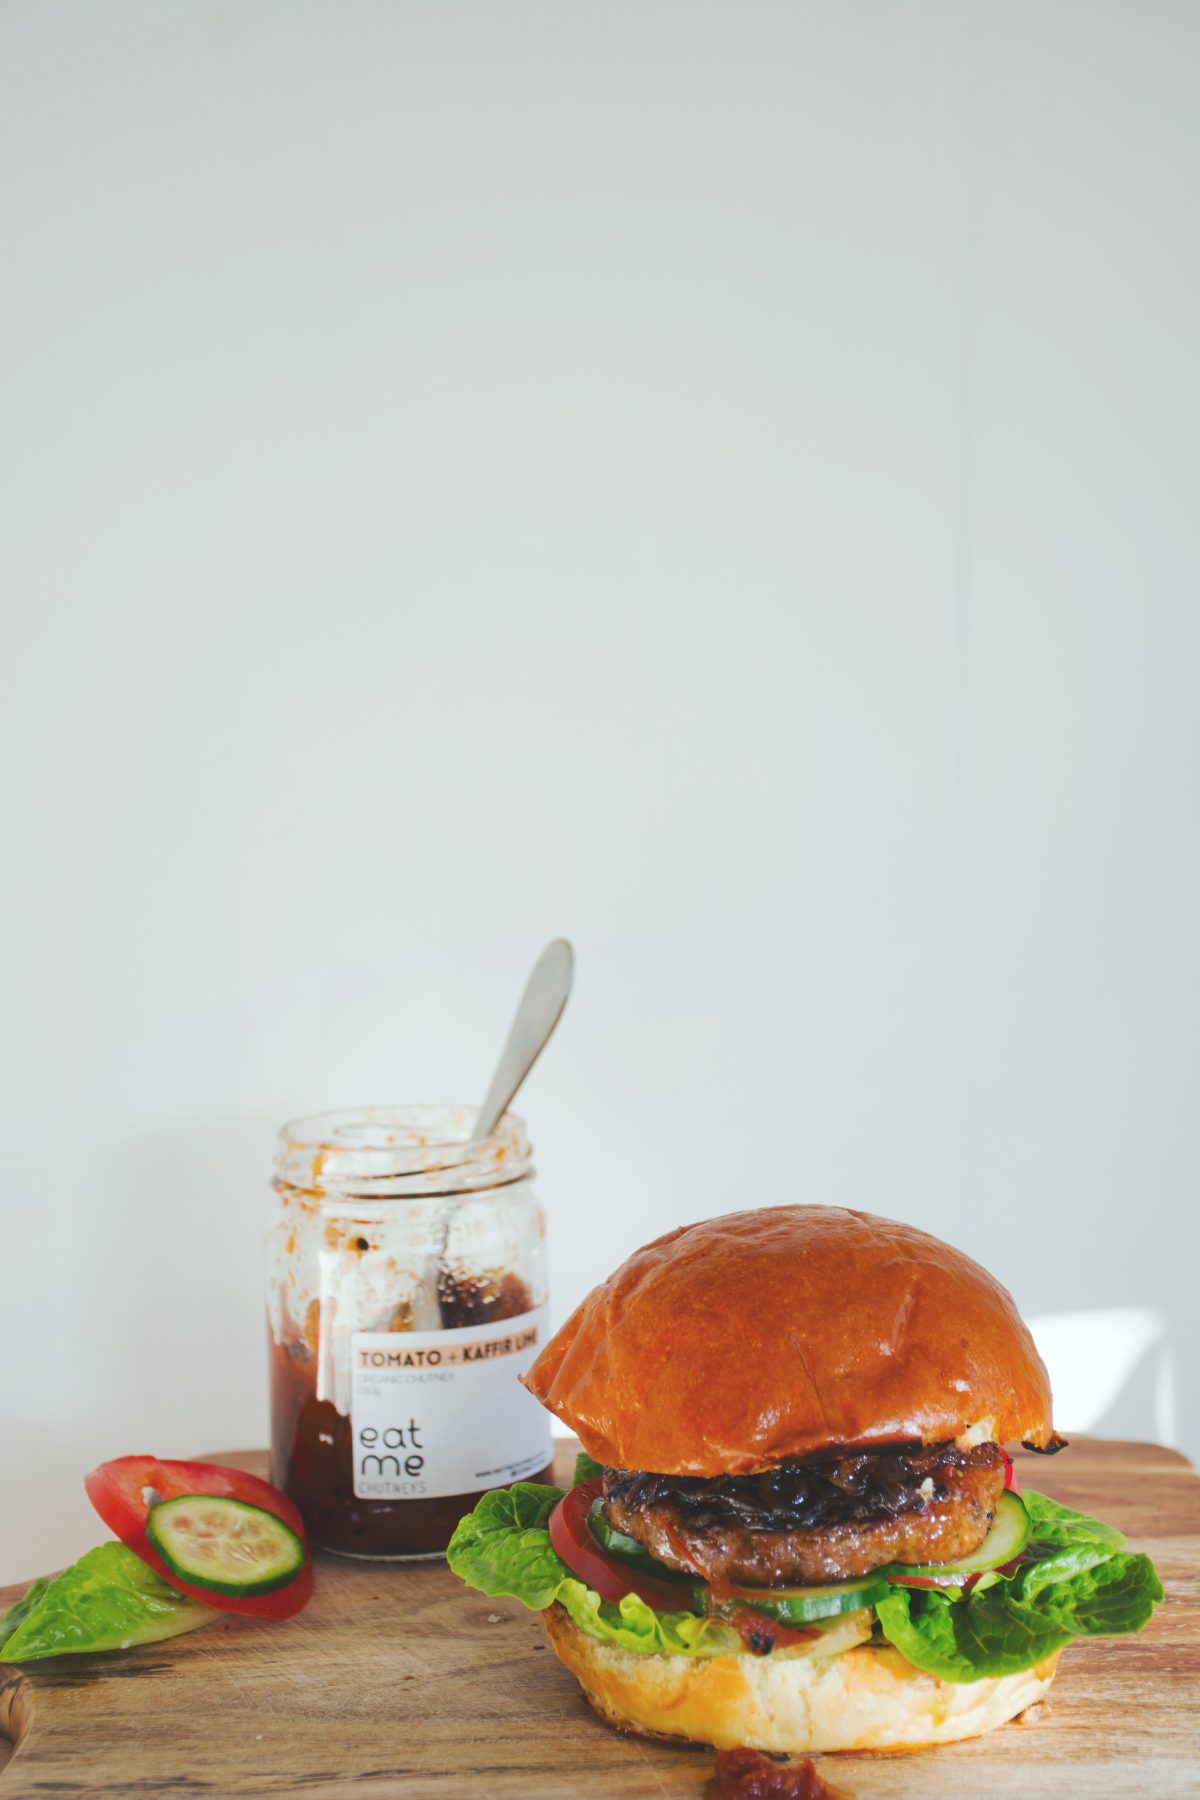 Delicious lamb burger with Tomato Kaffir Lime chutney, veggies and caramelized onions -thespiceadventuress.com